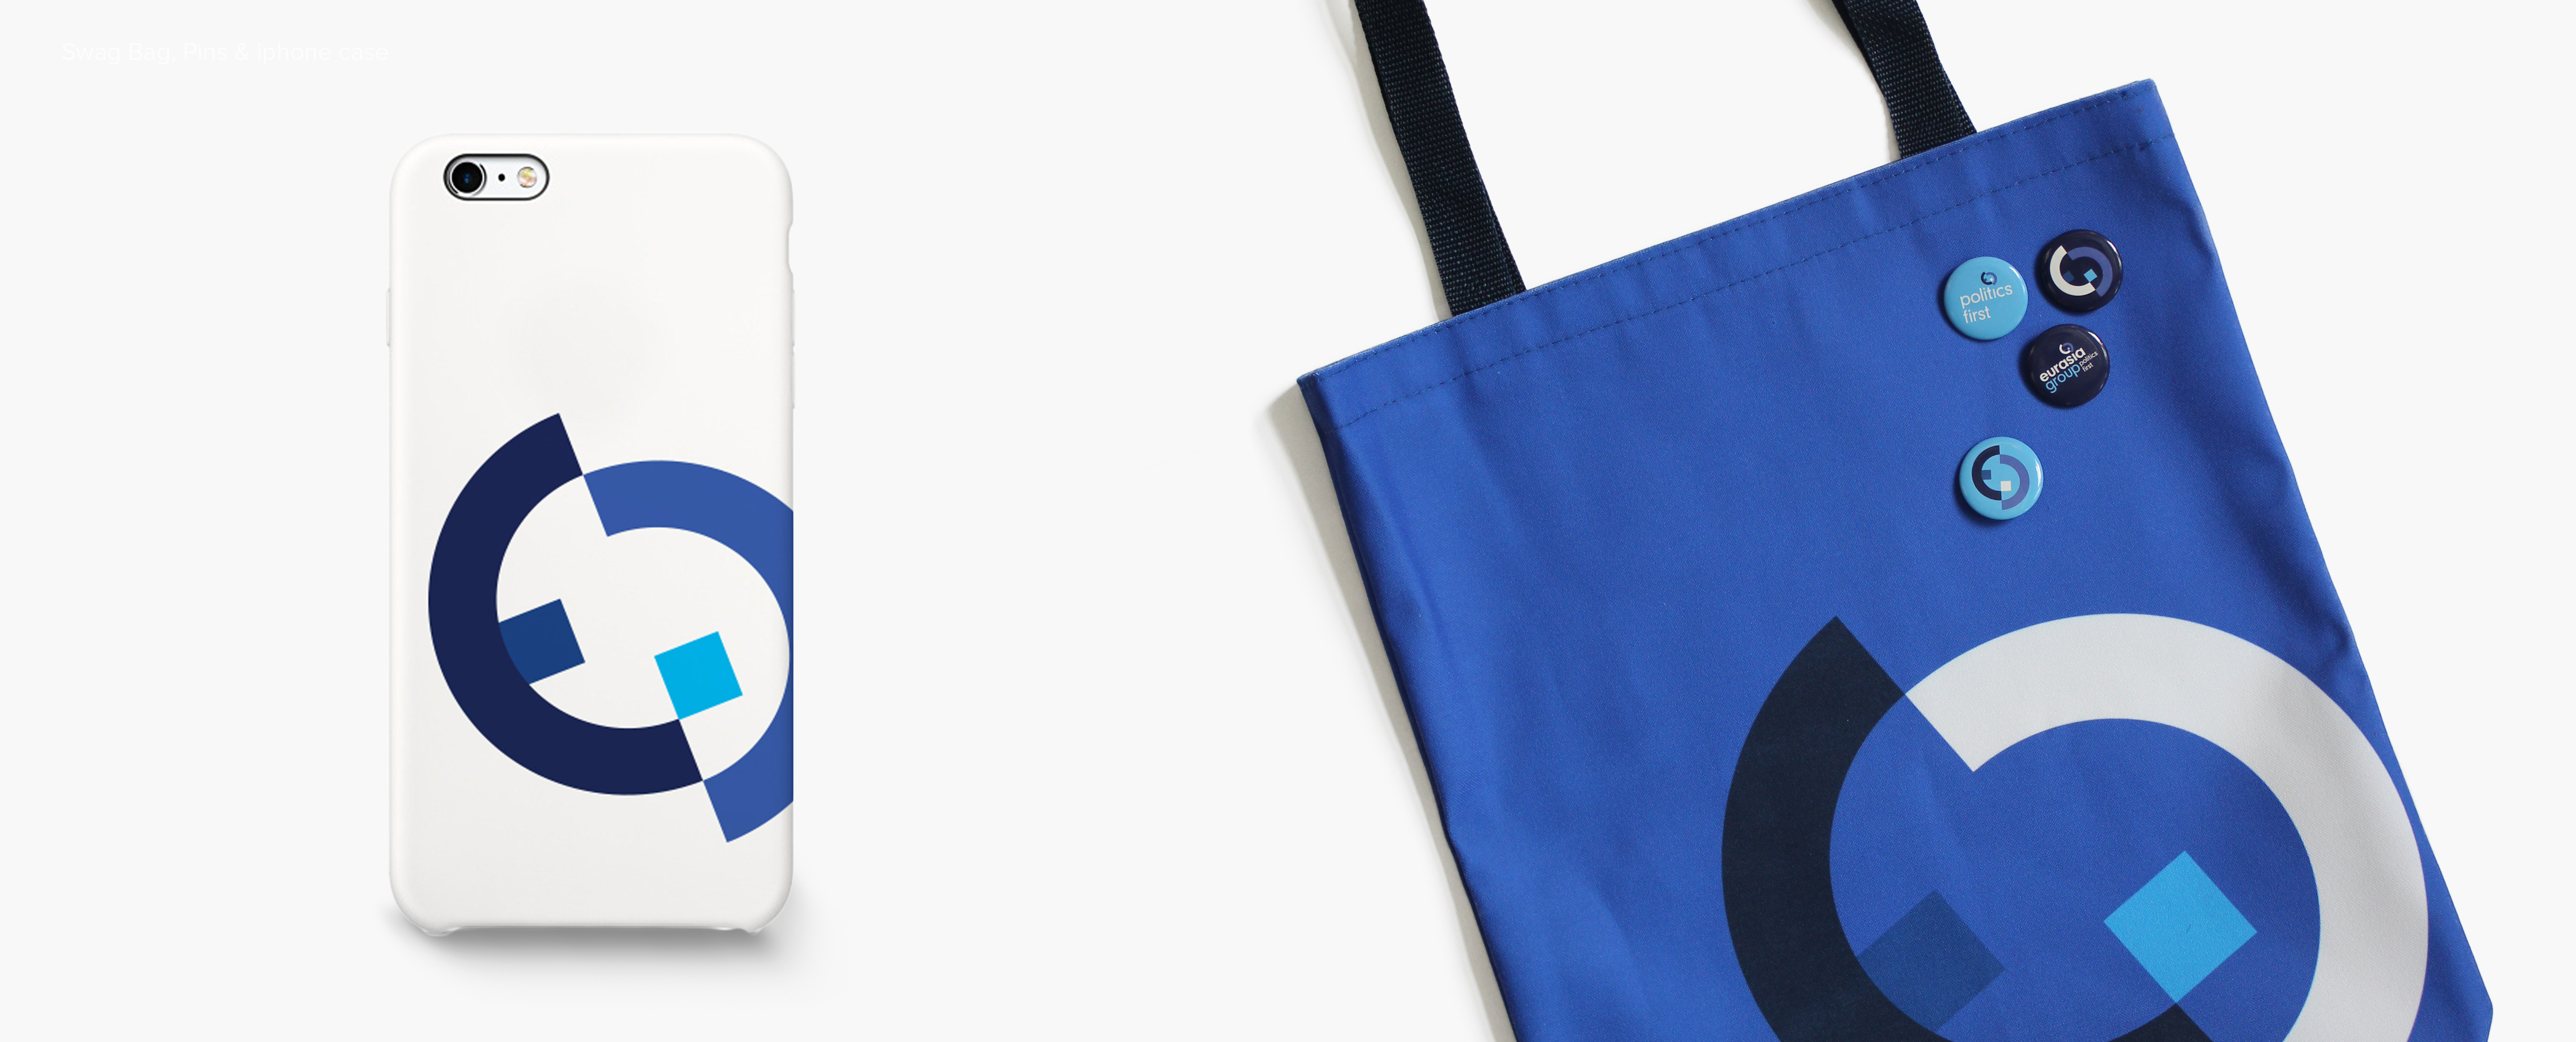 Eurasia Group branded tote bag and phone case